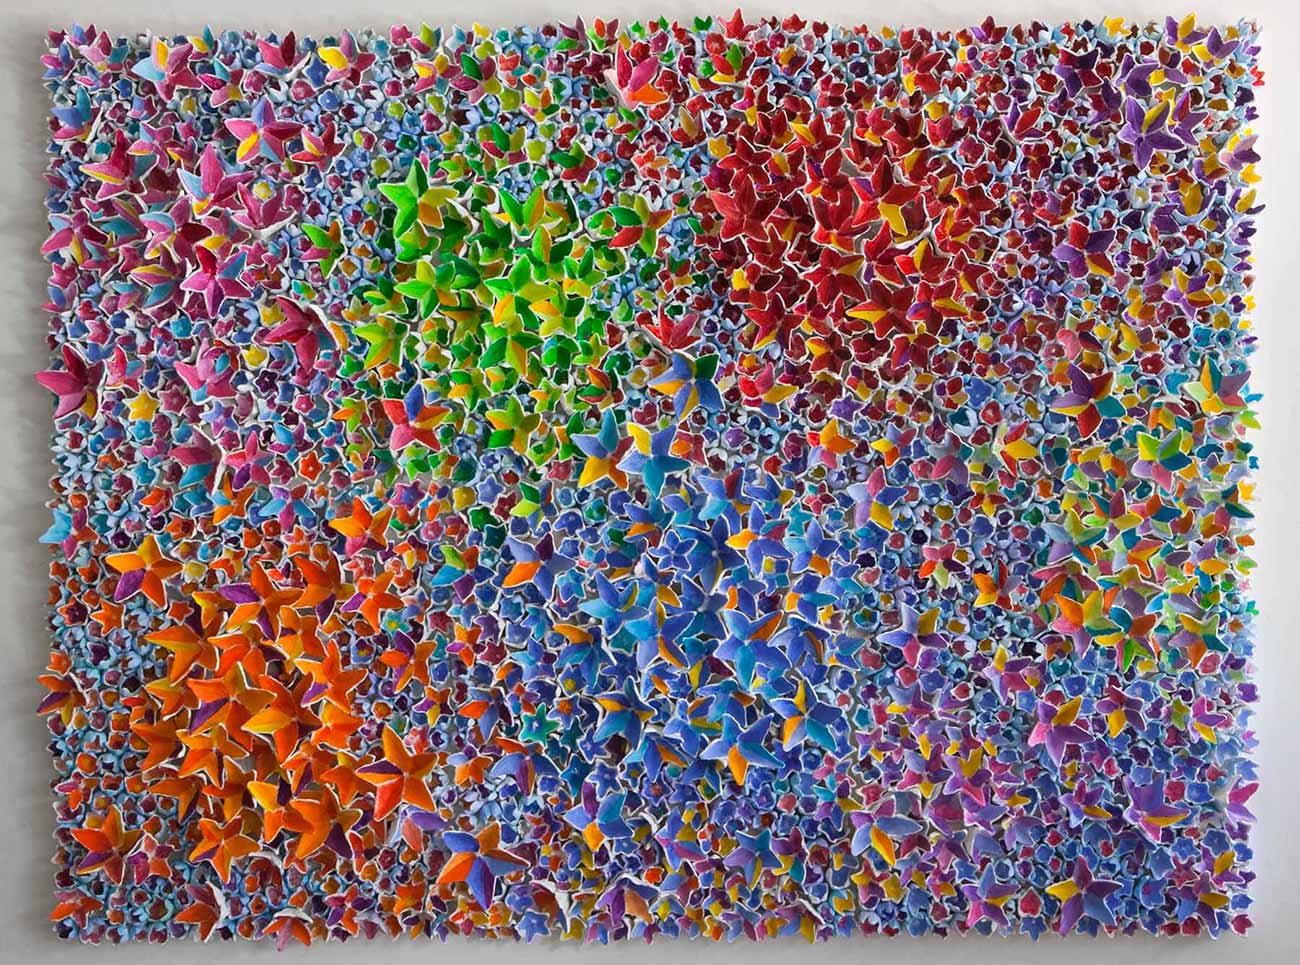 Where the rainbow is born 2007 Sculpture by kazumasa mizokami, A work that feels the movement of time by using rainbow colors on the shape of hundreds of flowers of five petals of various sizes